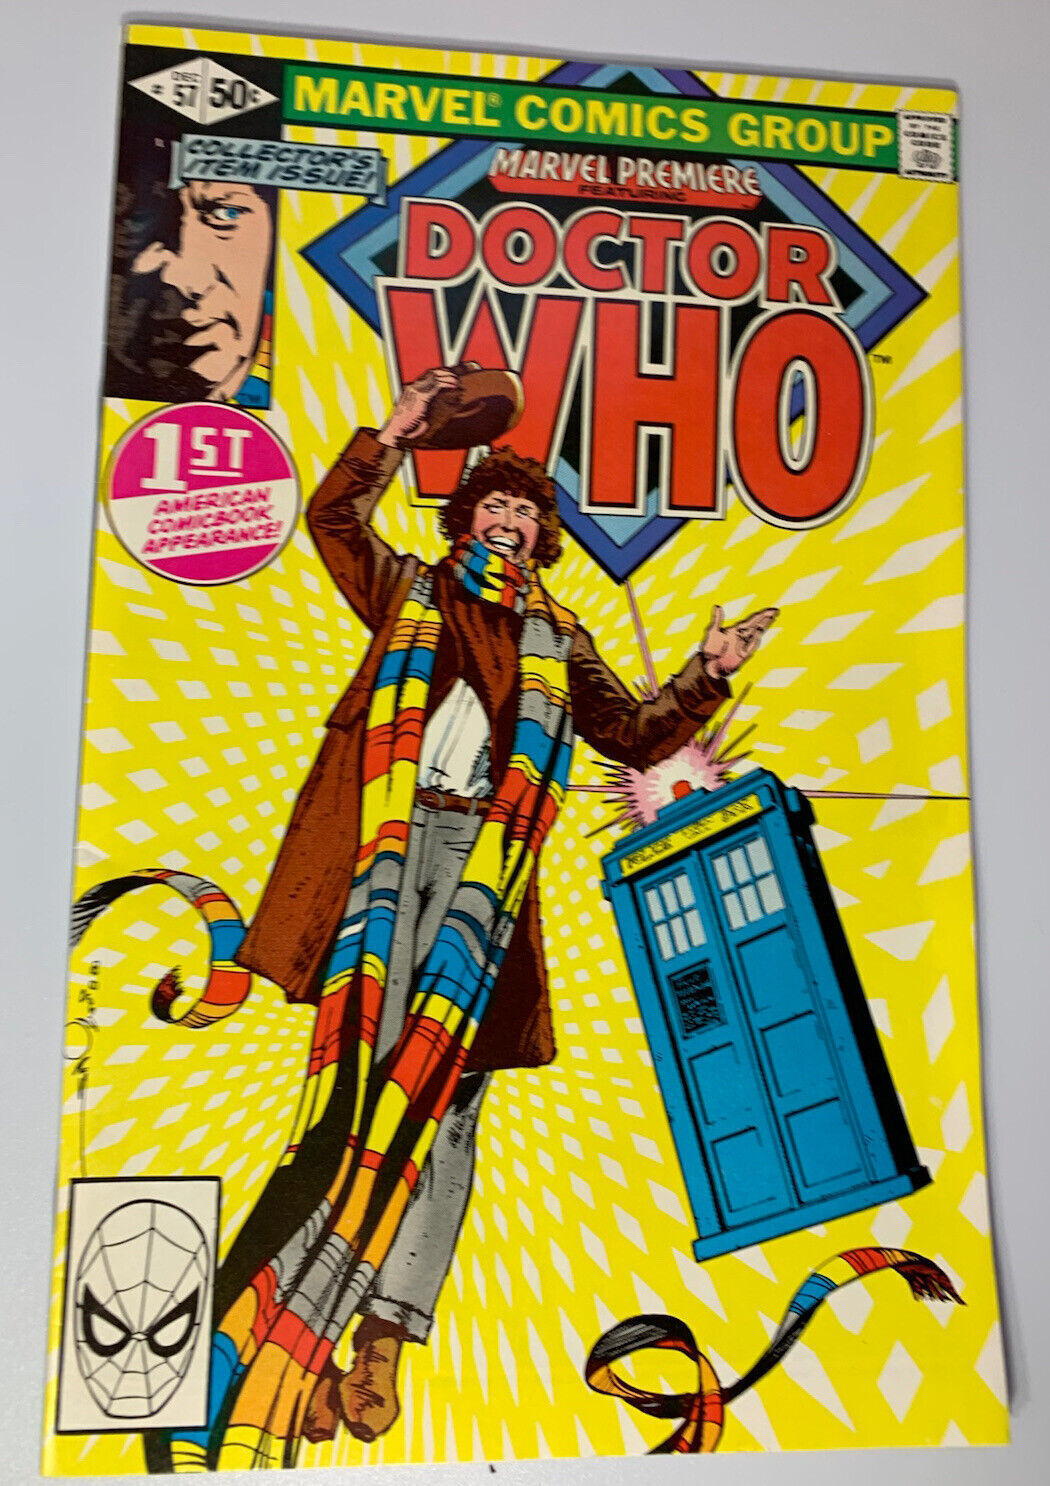 Marvel Premiere #57 (1980) 1st app. of the fourth Dr. Who in U.S. comic books...